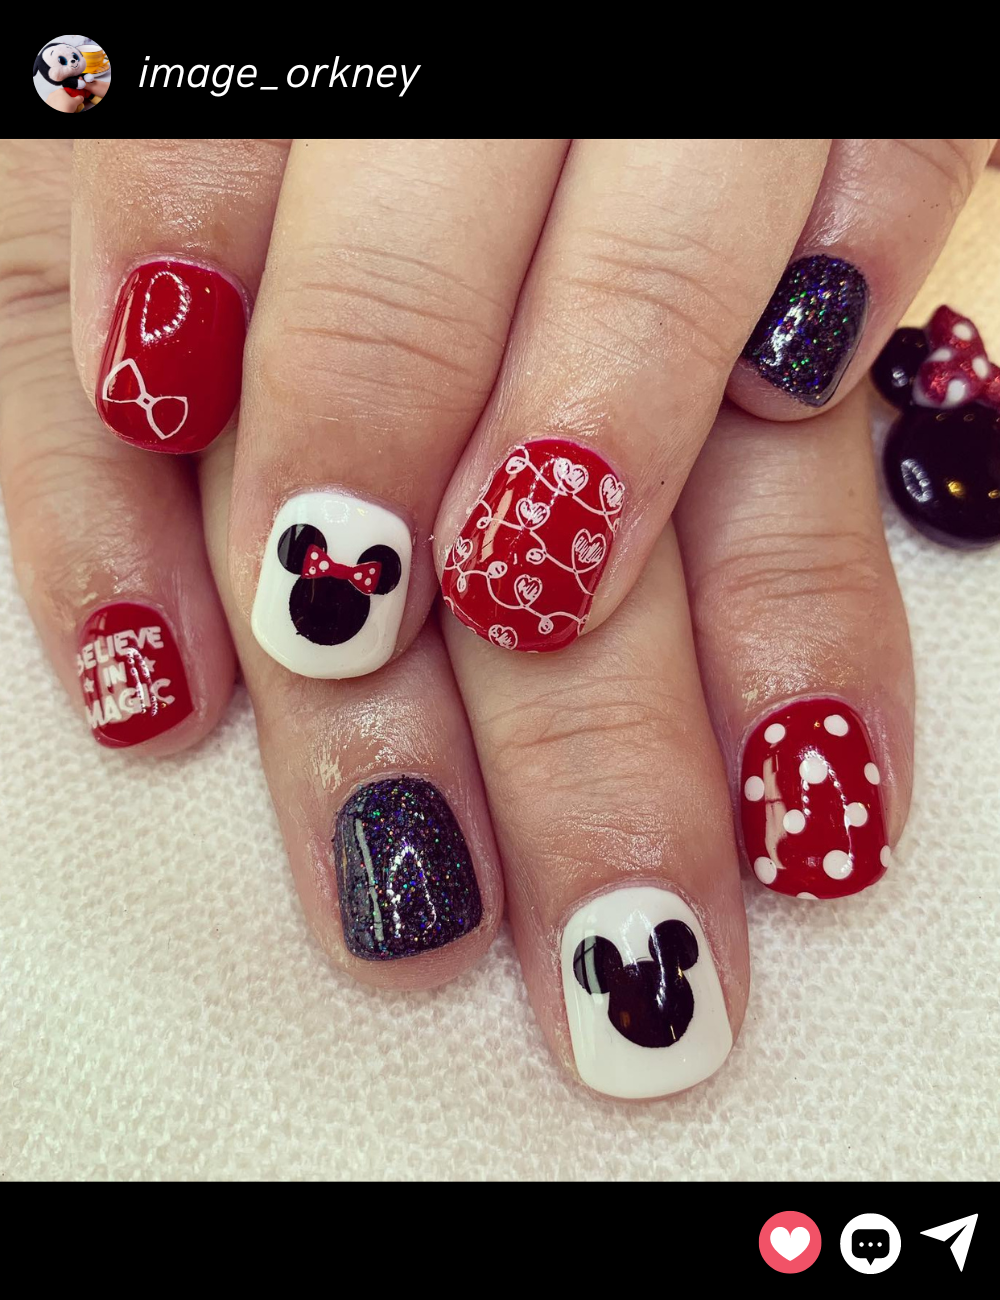 🎨💅 Looking to add some Disney style to your fingers and toes for your vacation this year? From classic Mickey ears to sparkly princess vibes, these Disney nails will give you all the feels. 😍👸